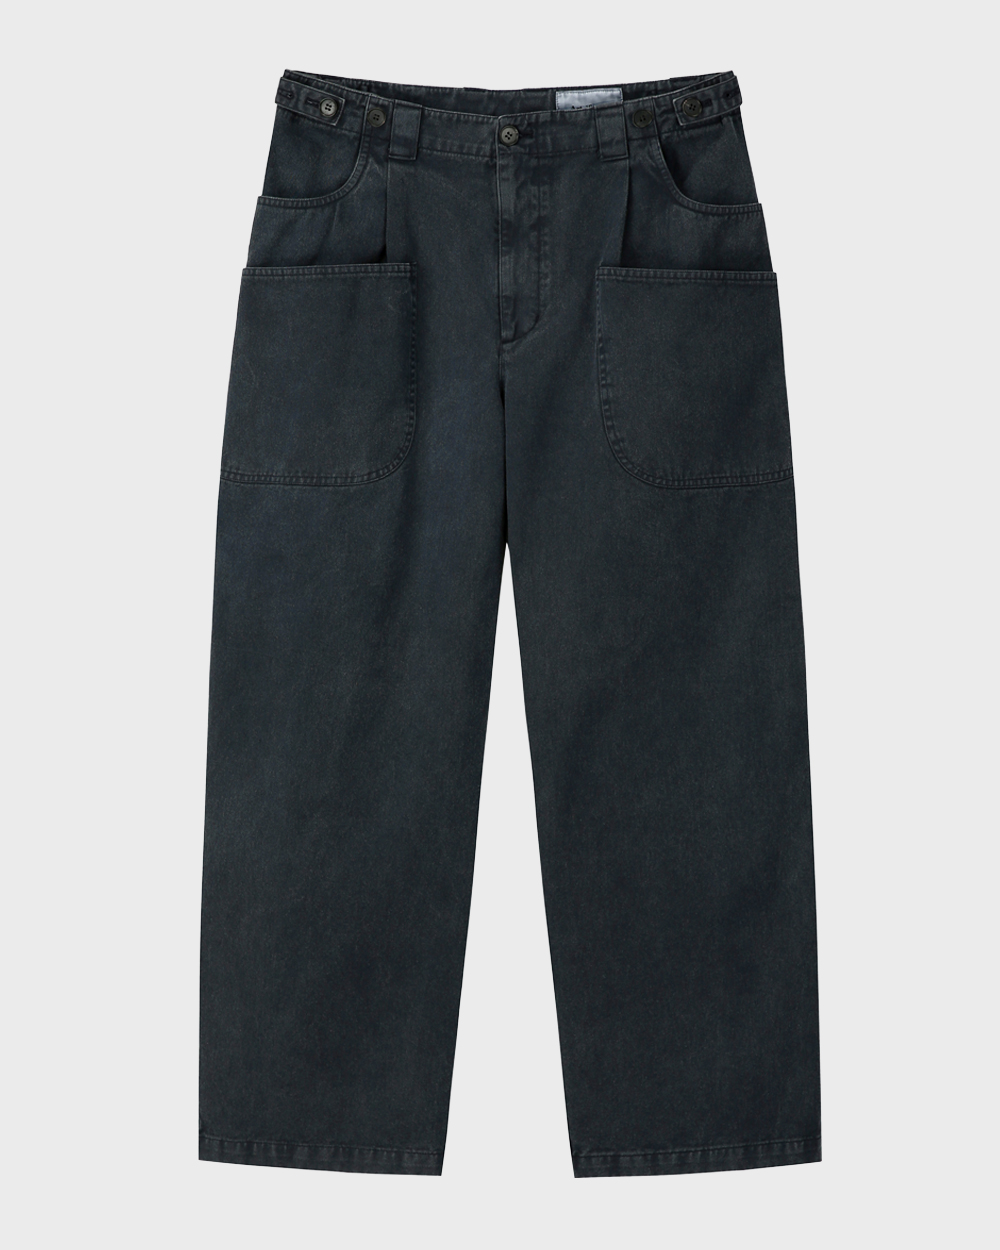 French Workwear Pants (Navy)